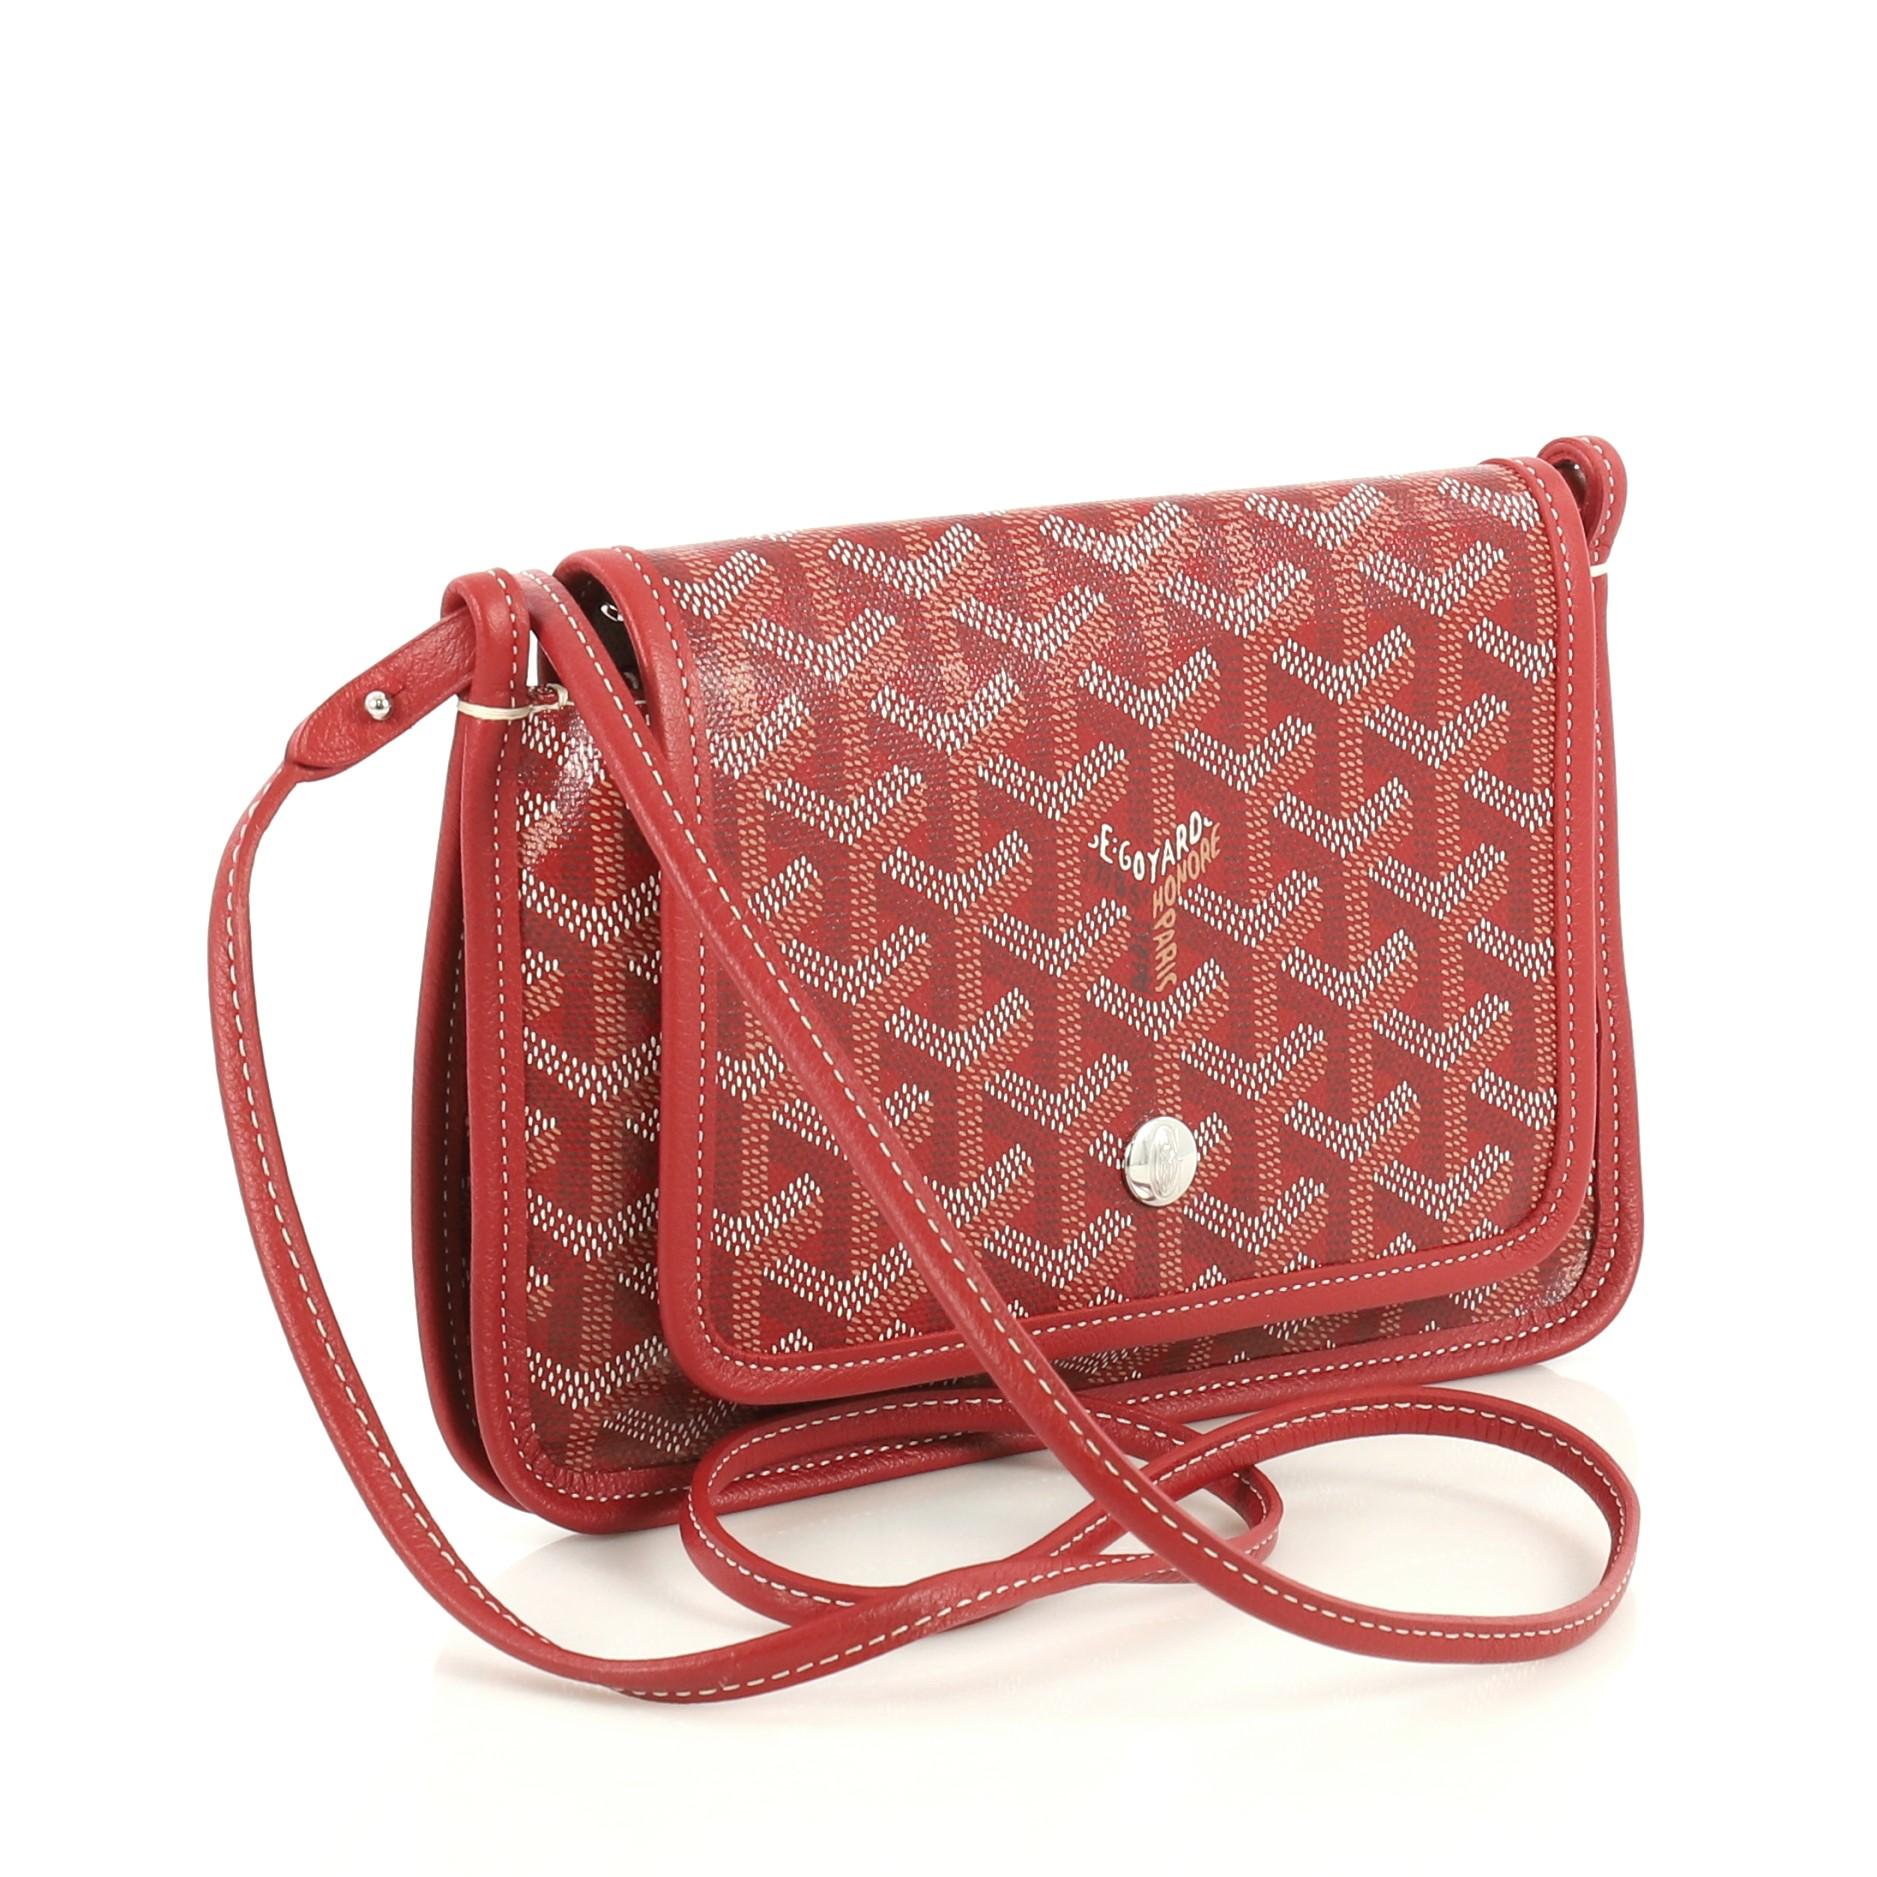 This Goyard Plumet Clutch Wallet Coated Canvas, crafted from red coated canvas, features a detachable leather strap, leather trim and silver-tone hardware. Its snap closure opens to a neutral fabric interior with zip pocket. 

Condition: Pristine.